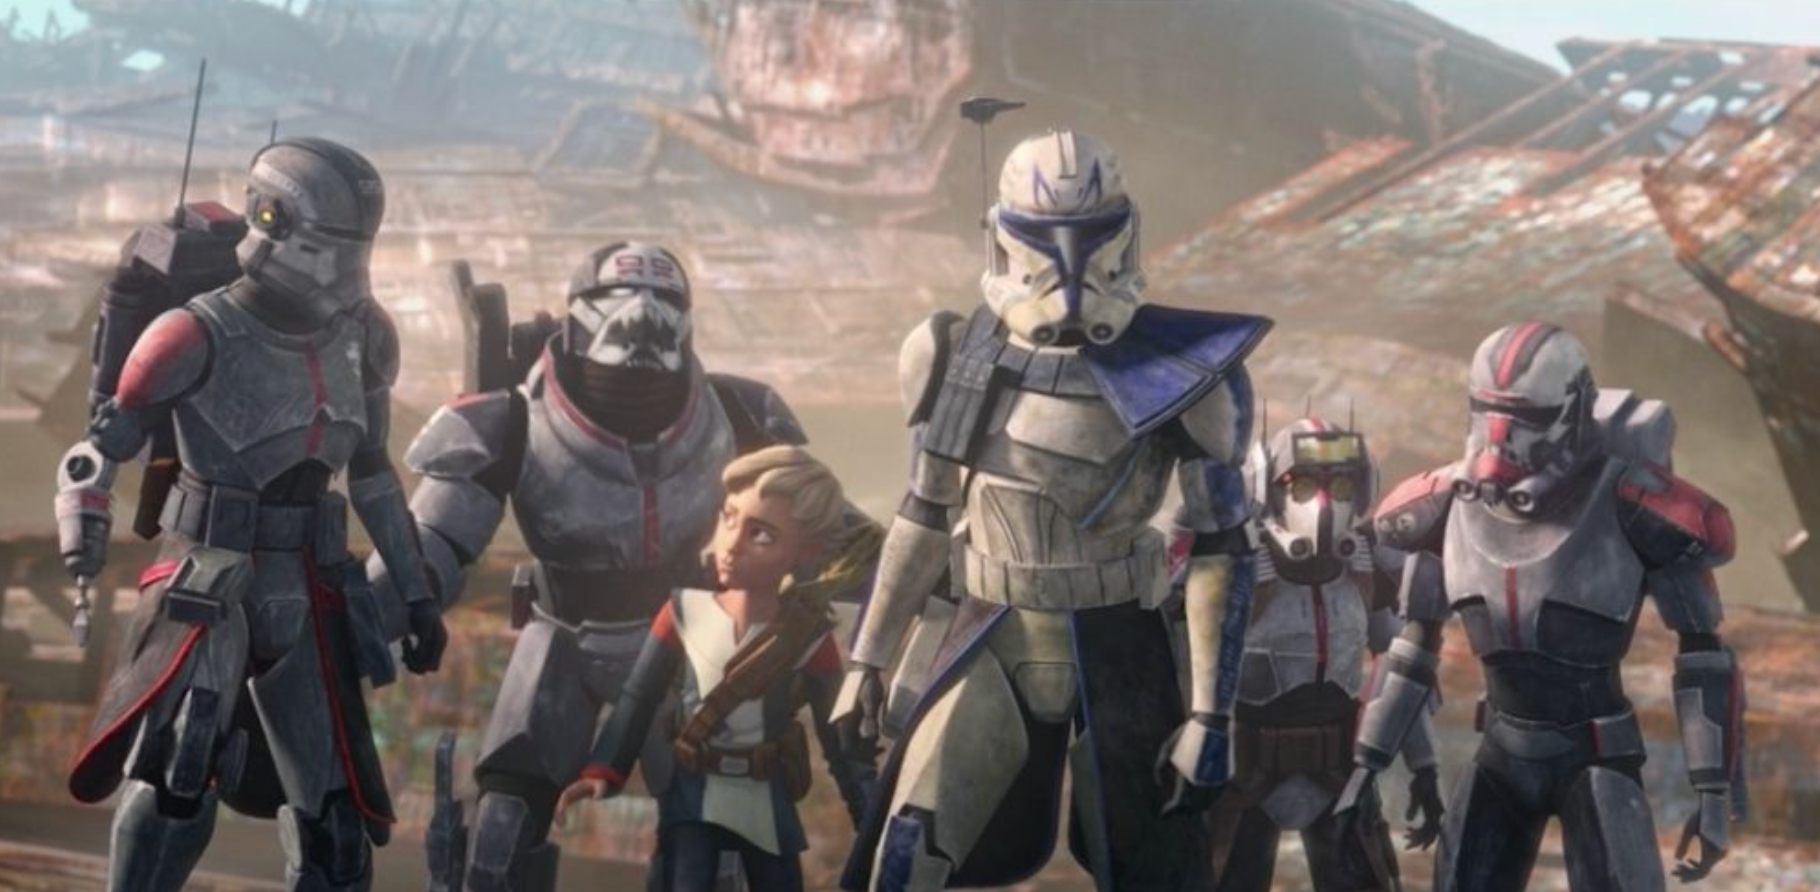 Captain Rex and the Bad Batch on Bracca